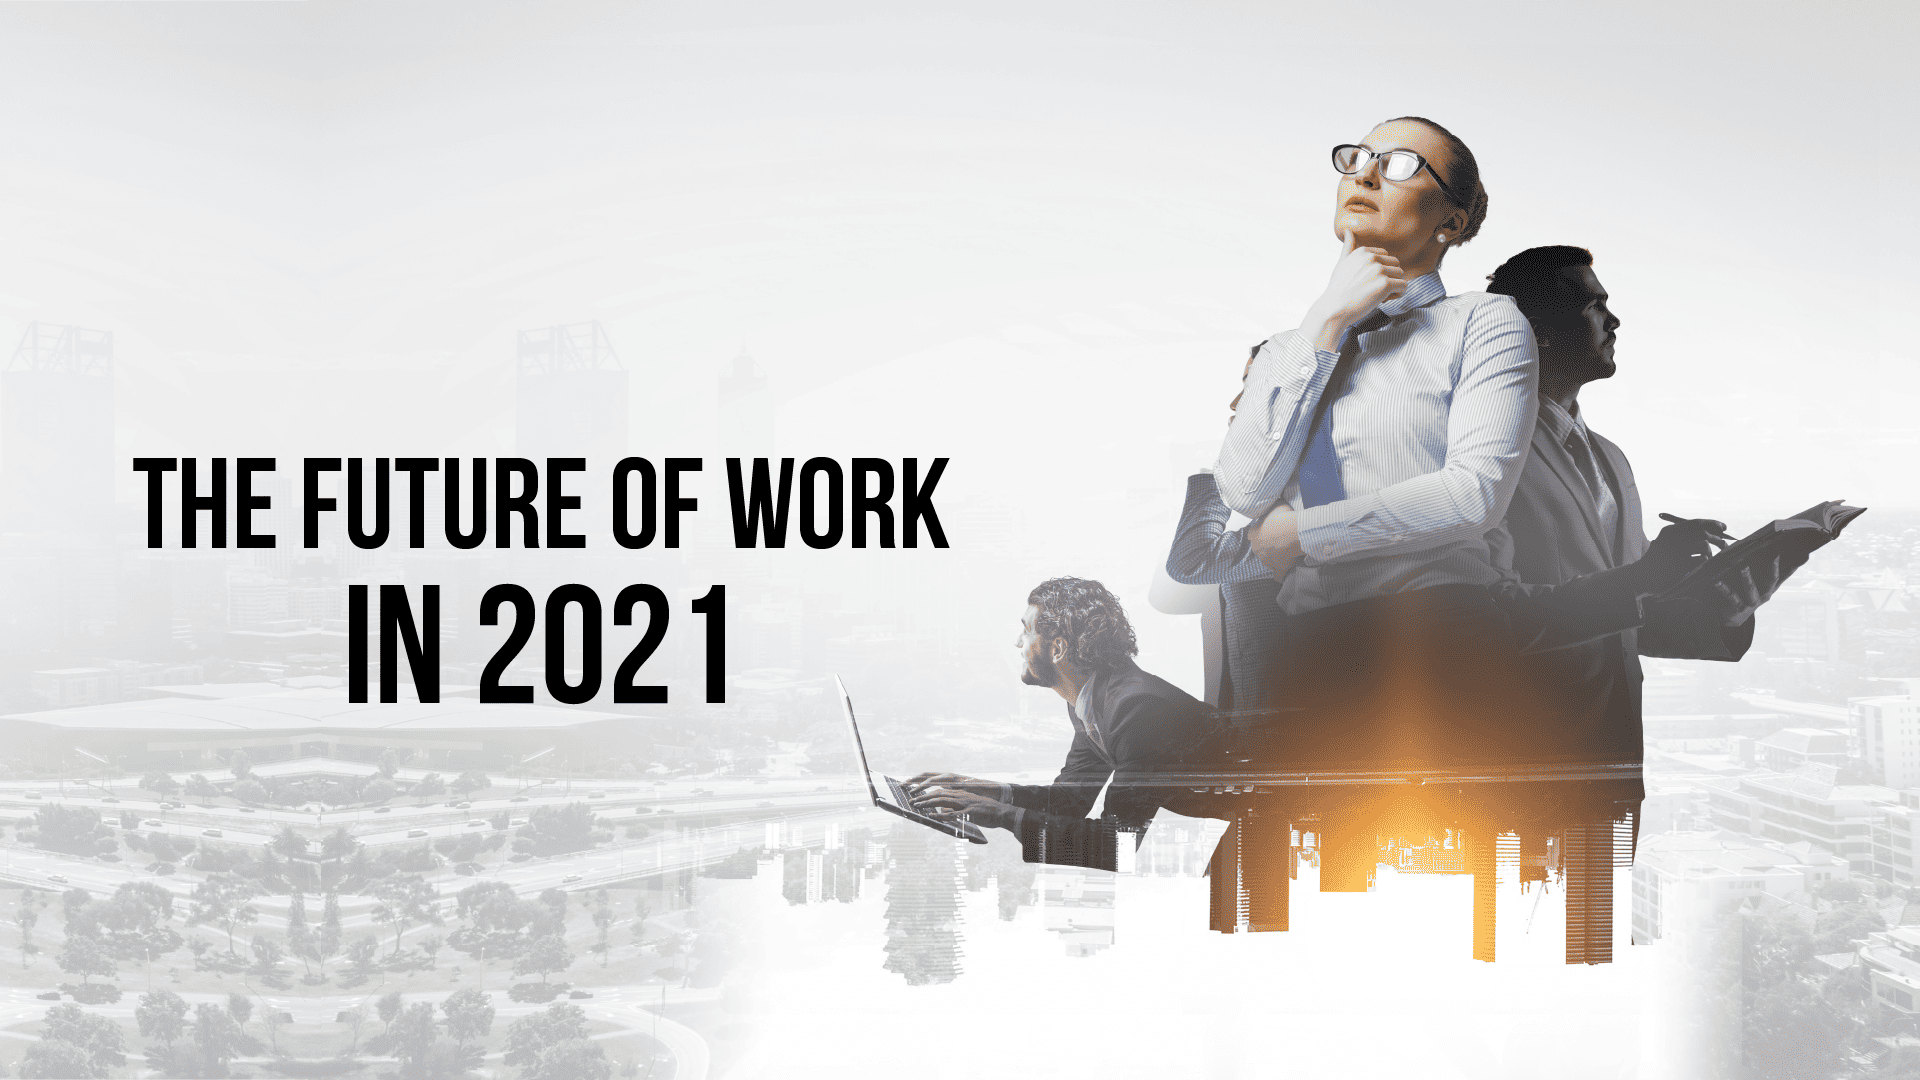 The Future of Work in 2021